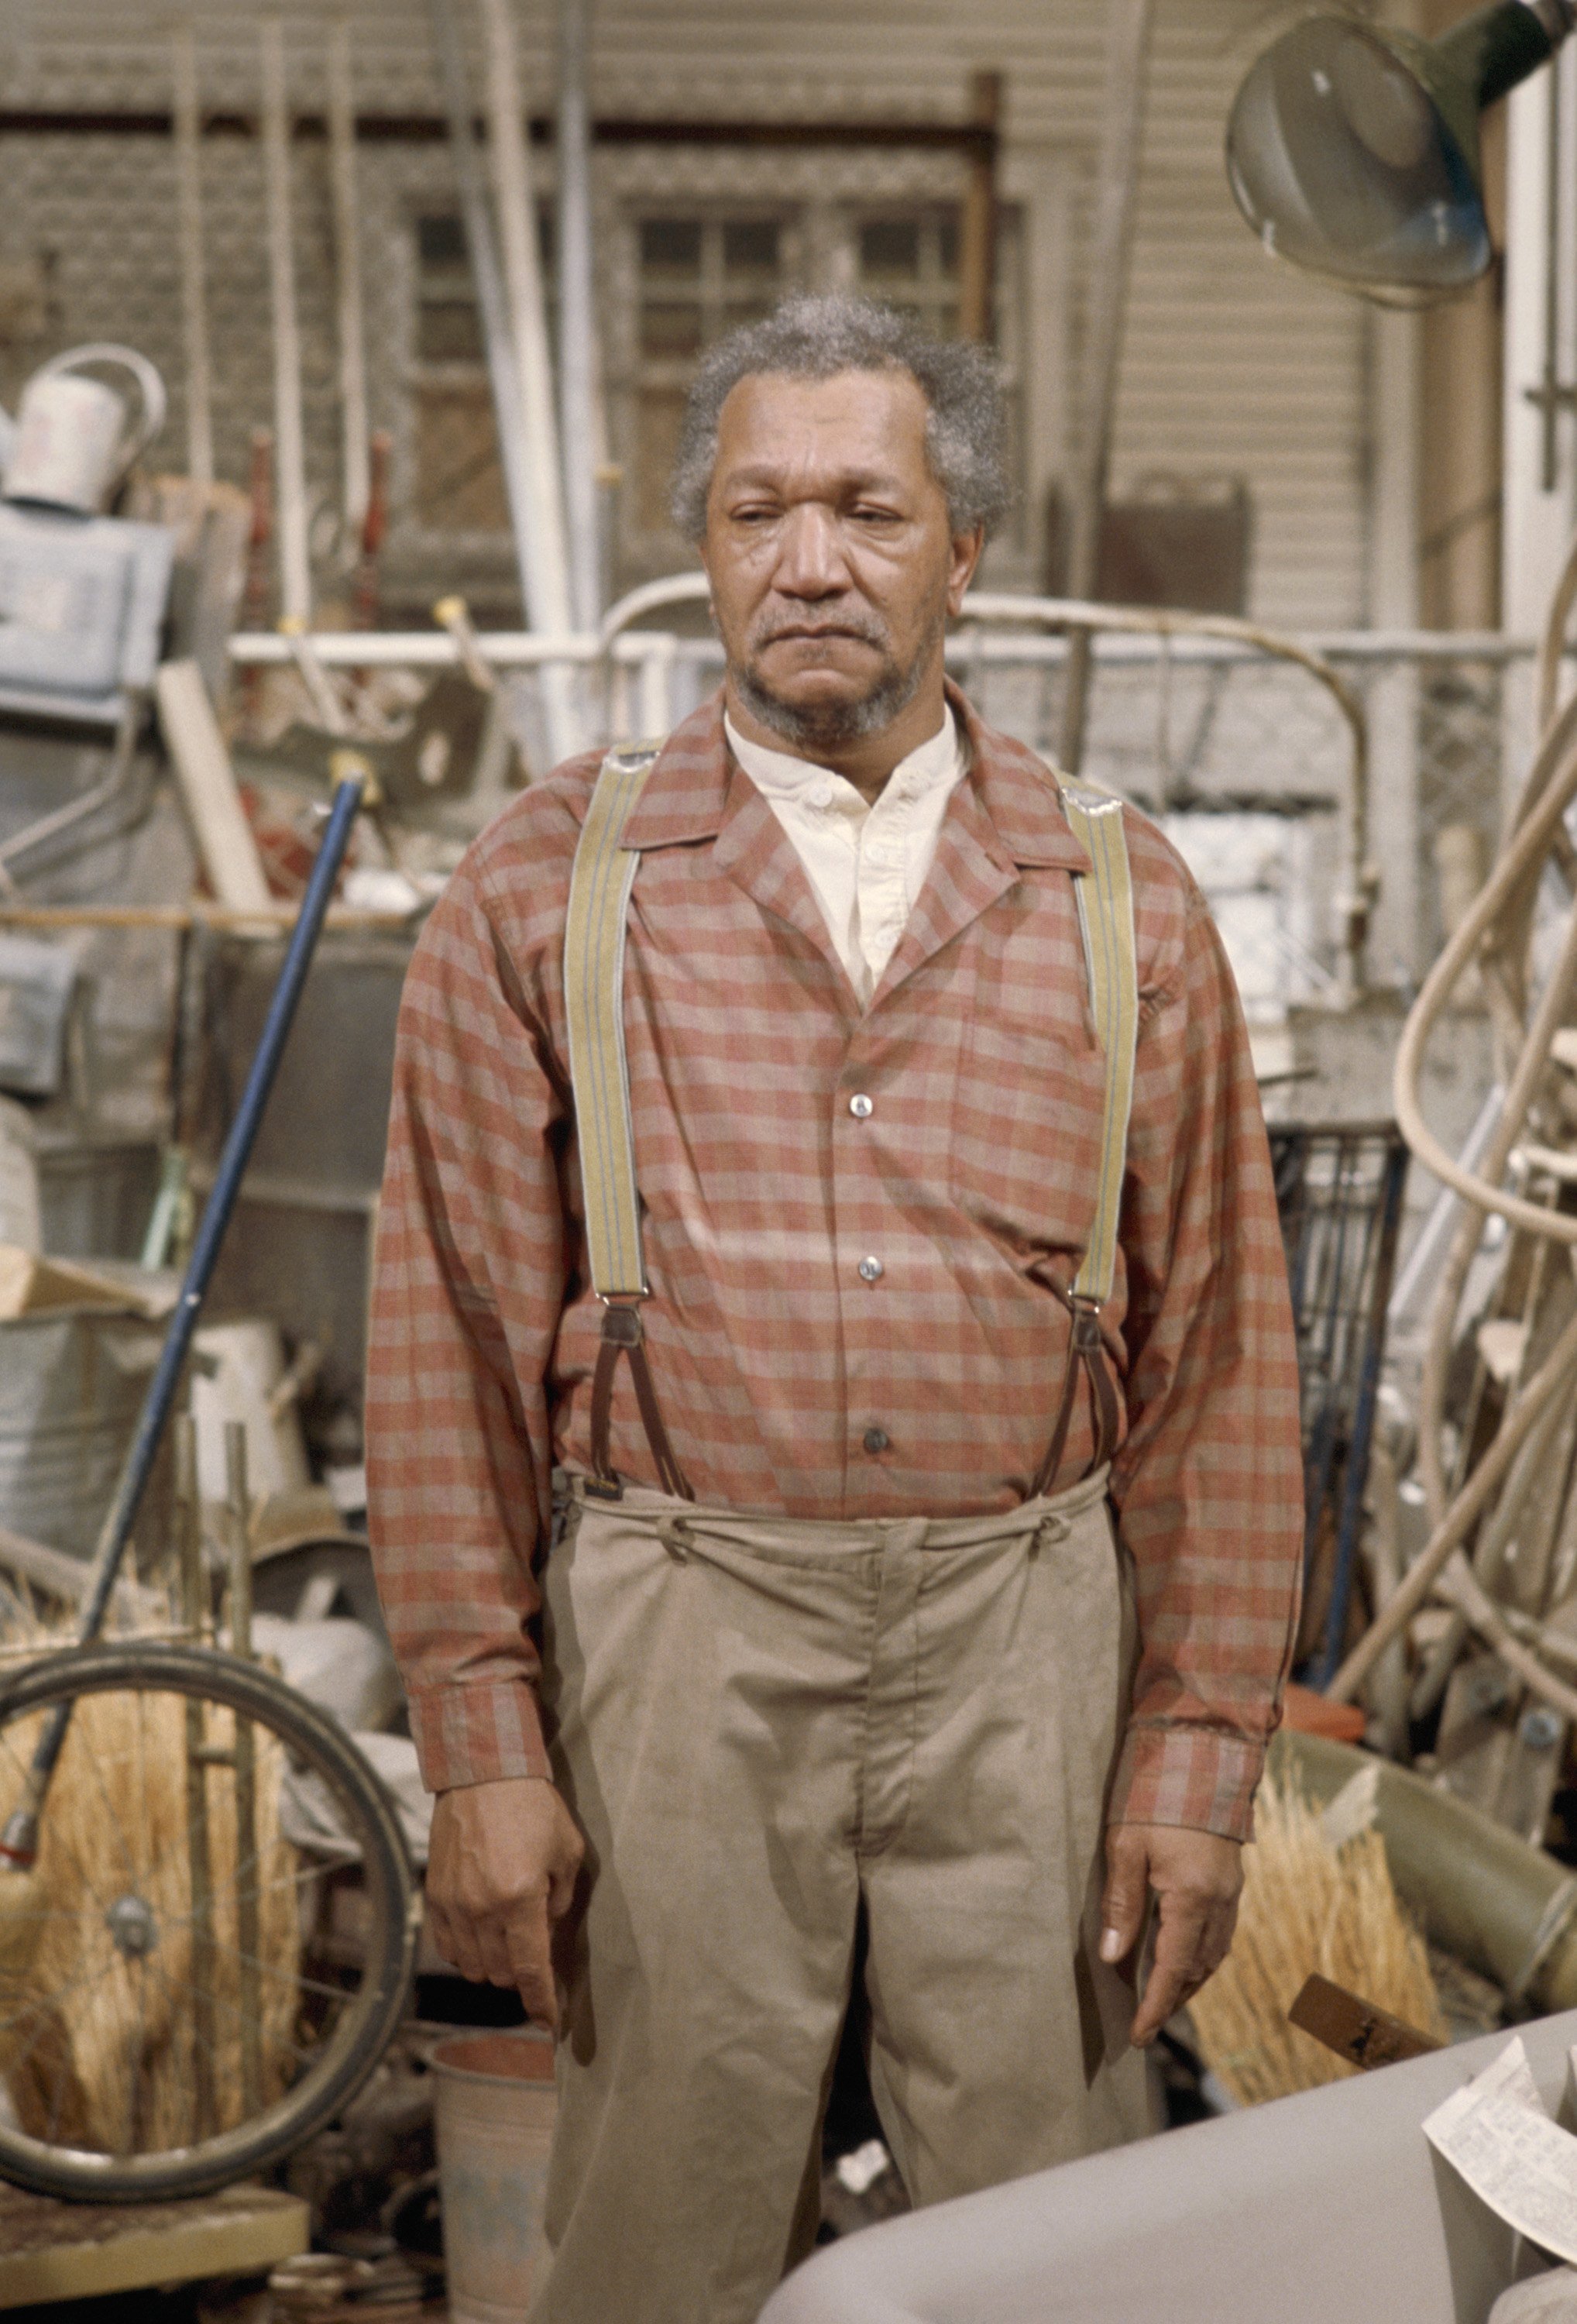 Redd Foxx as Fred G. Sanford in an episode of "Sanford and Son" aired on August 12, 1972 | Photo: Getty Images